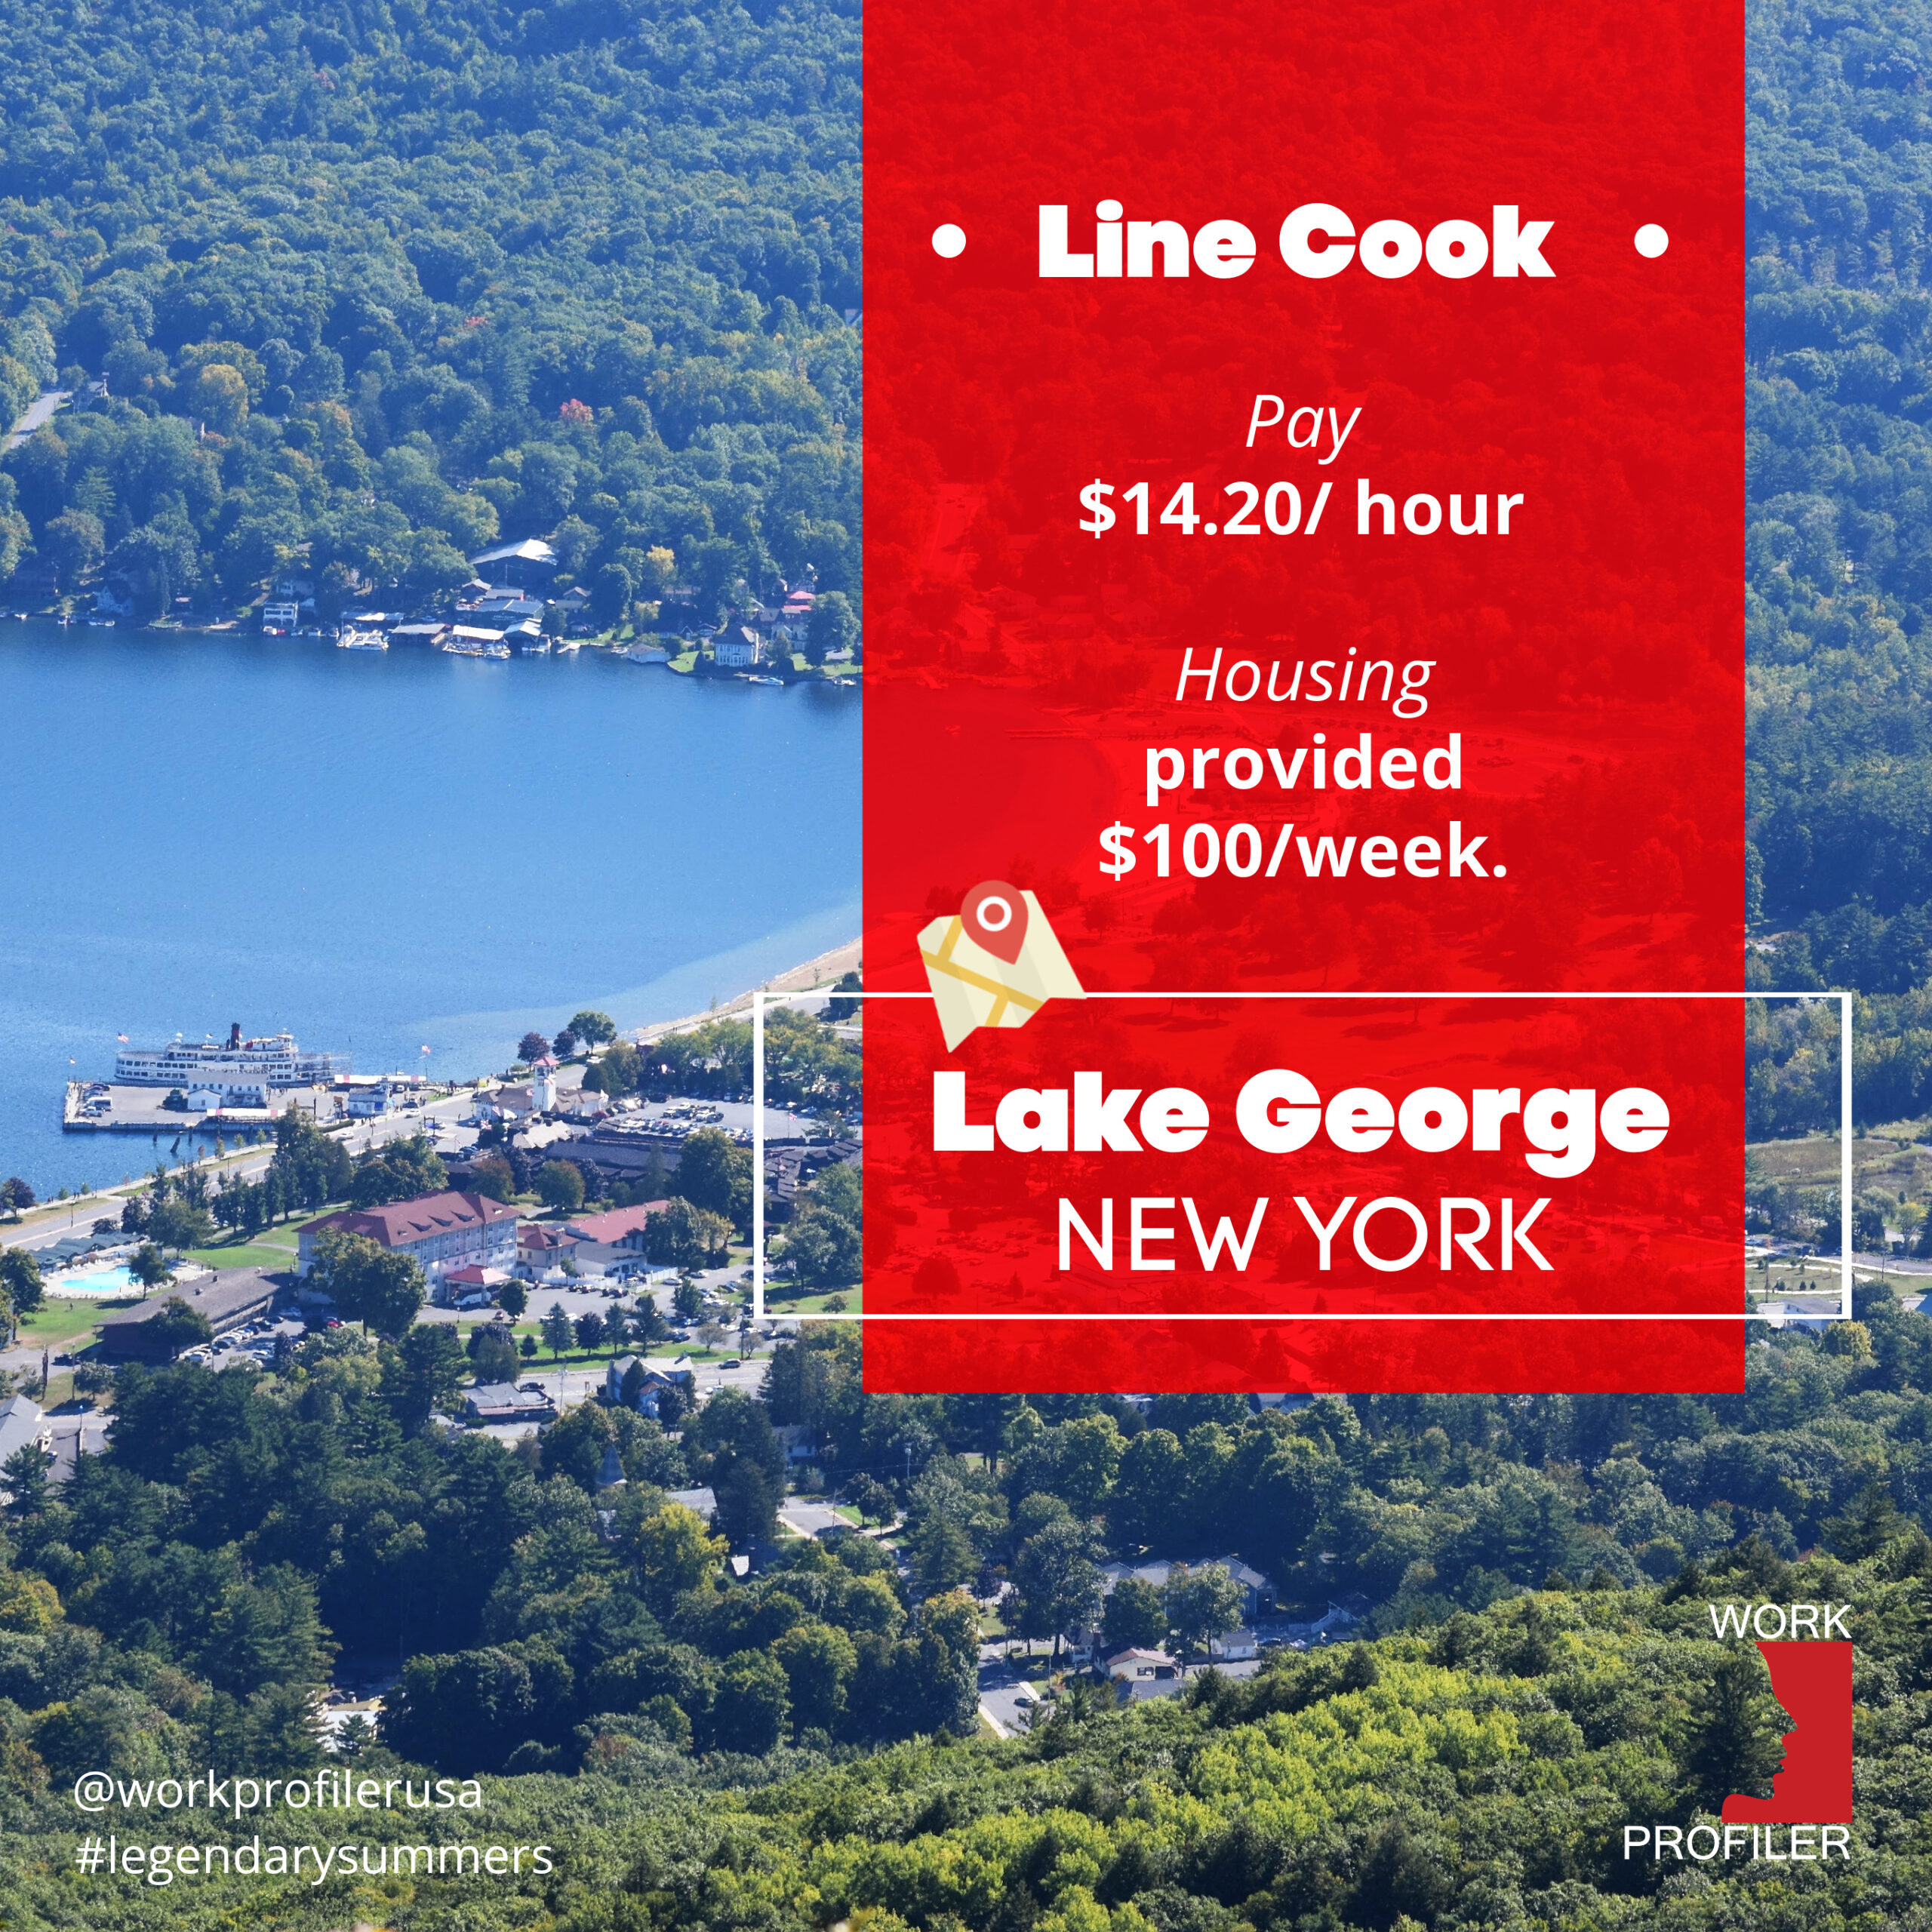 A job advertisement with a red background and black text offering a line cook position at Lake George, New York for $14.20 per hour and housing provided for $100 per week